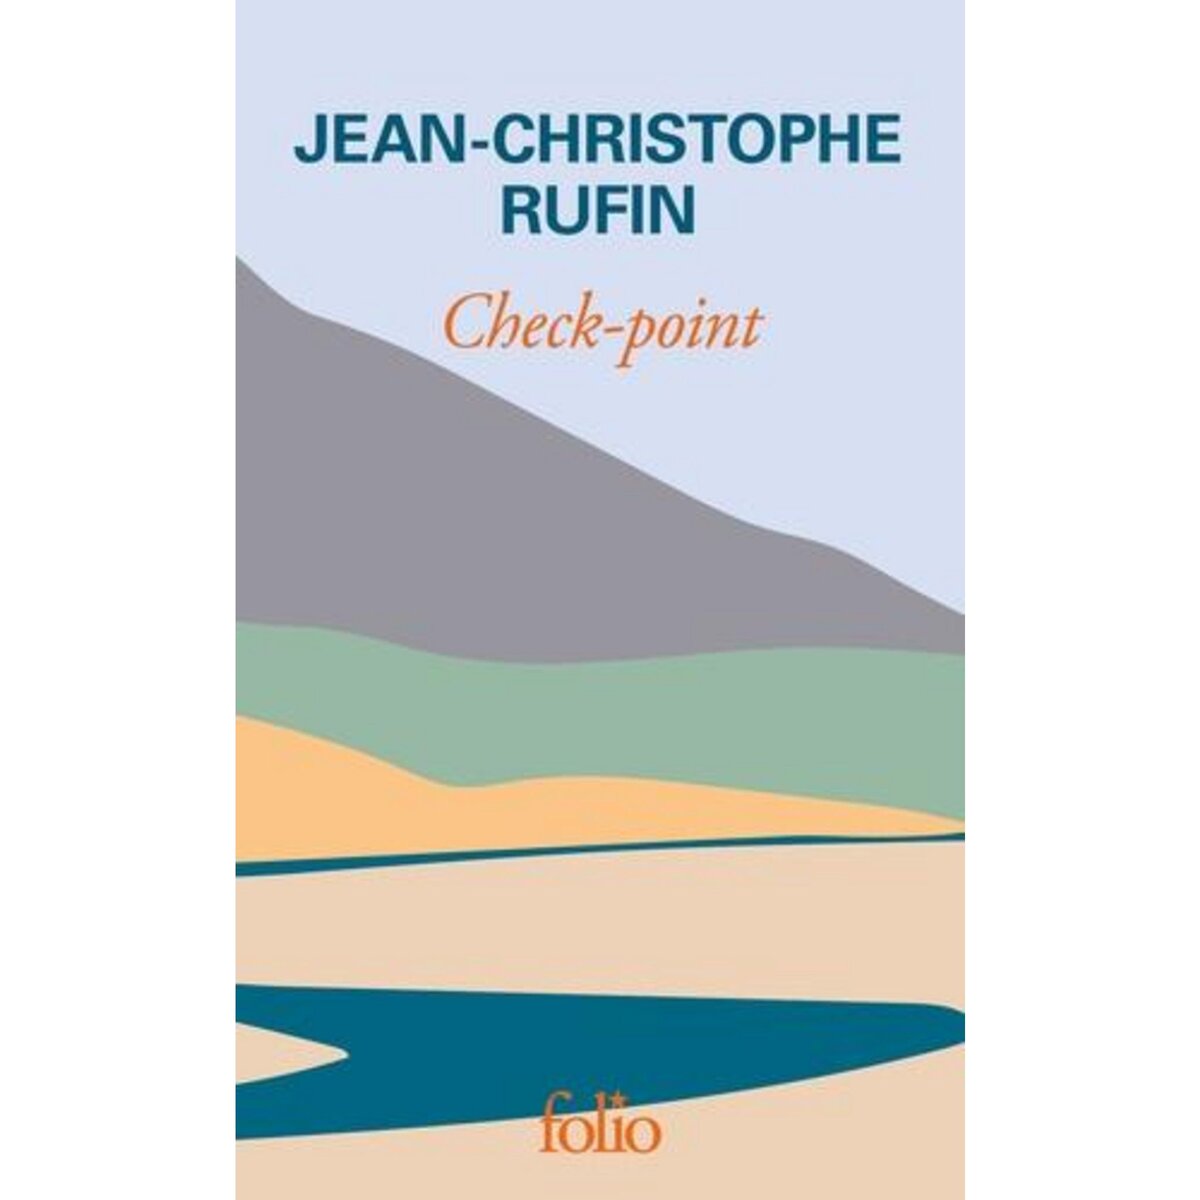  CHECK-POINT. EDITION COLLECTOR, Rufin Jean-Christophe